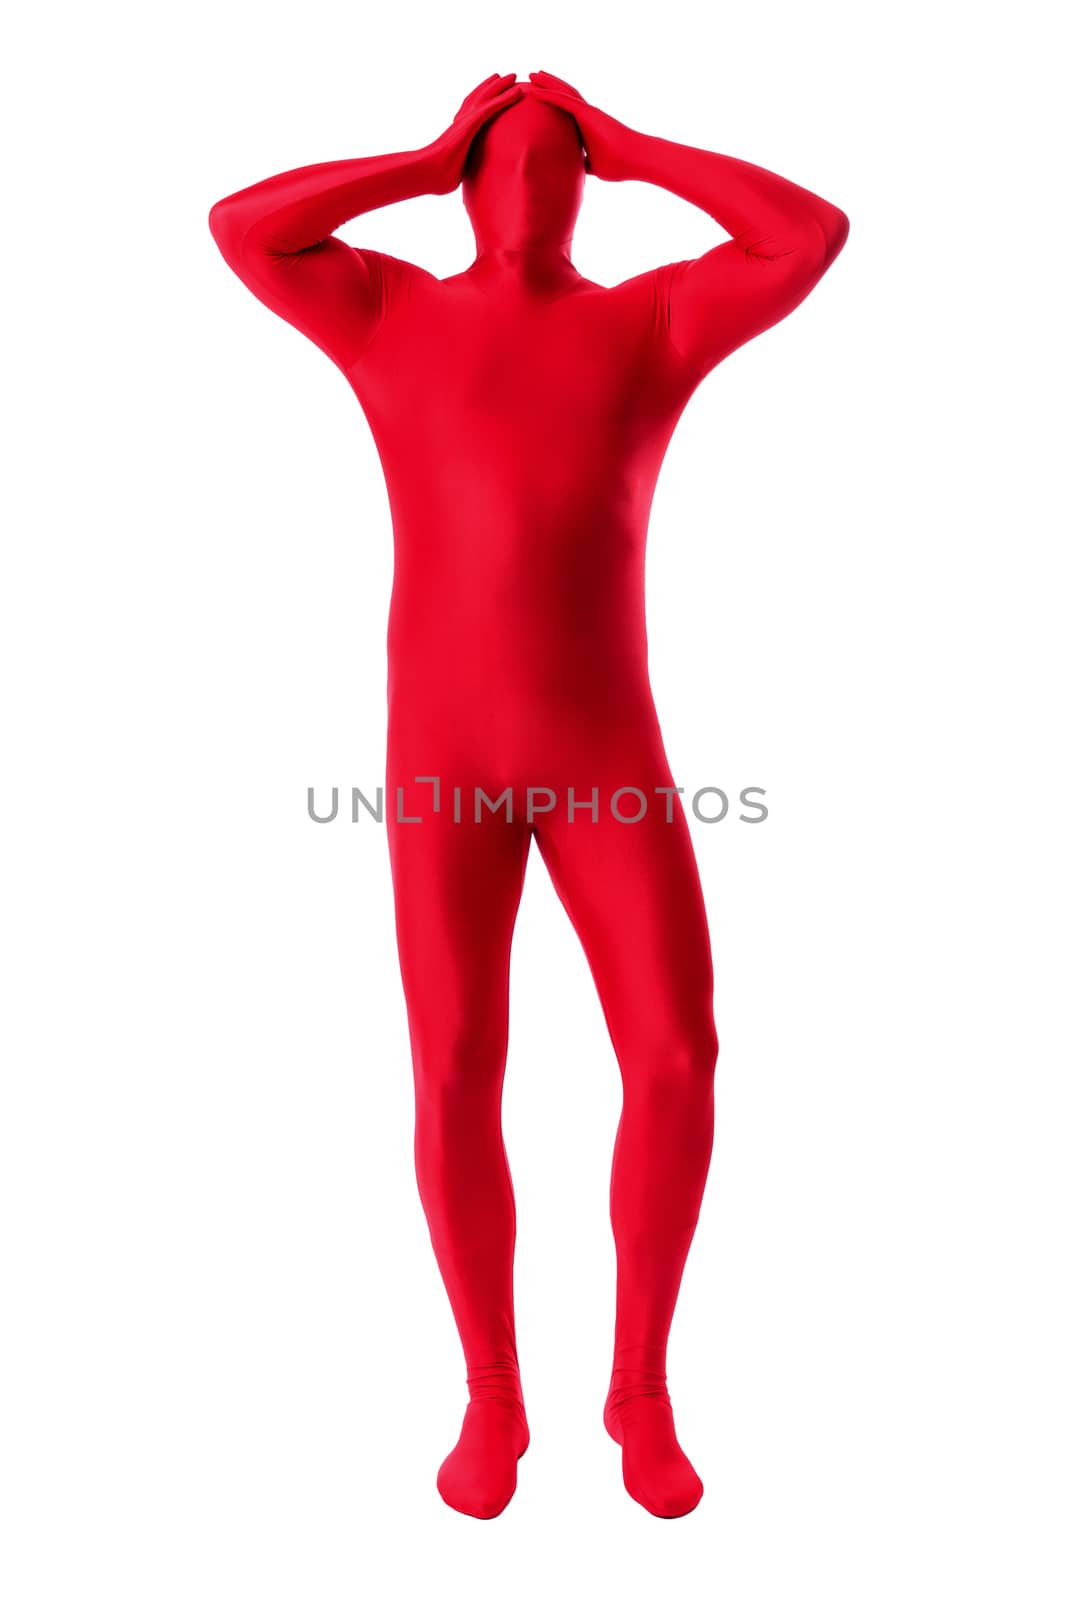 A handsome man in a red body suit isolated on a white background